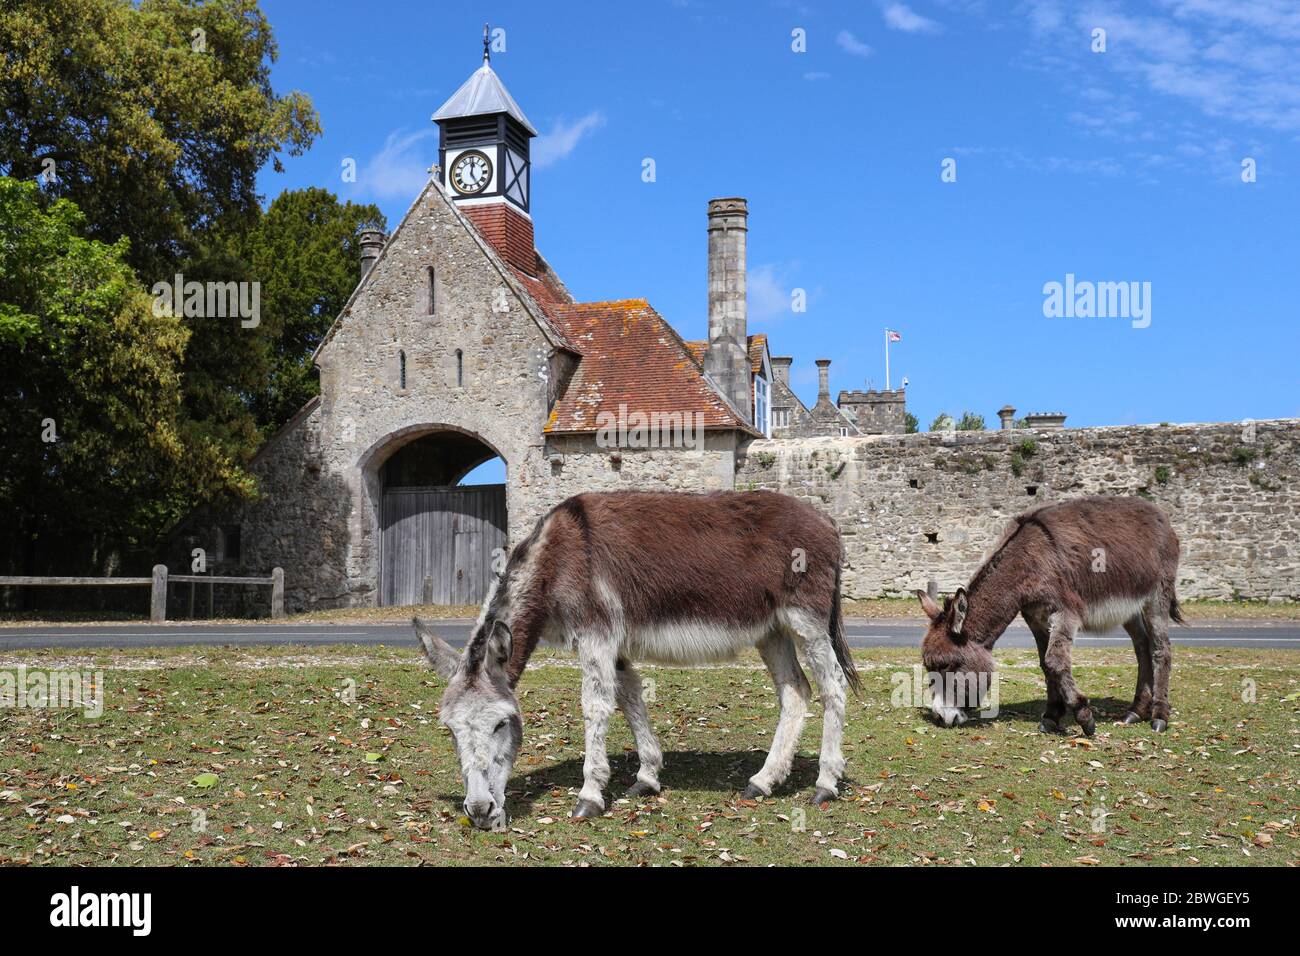 Donkeys graze in front of the Clock tower and Gatehouse in Beaulieu Village in The New Forest Stock Photo